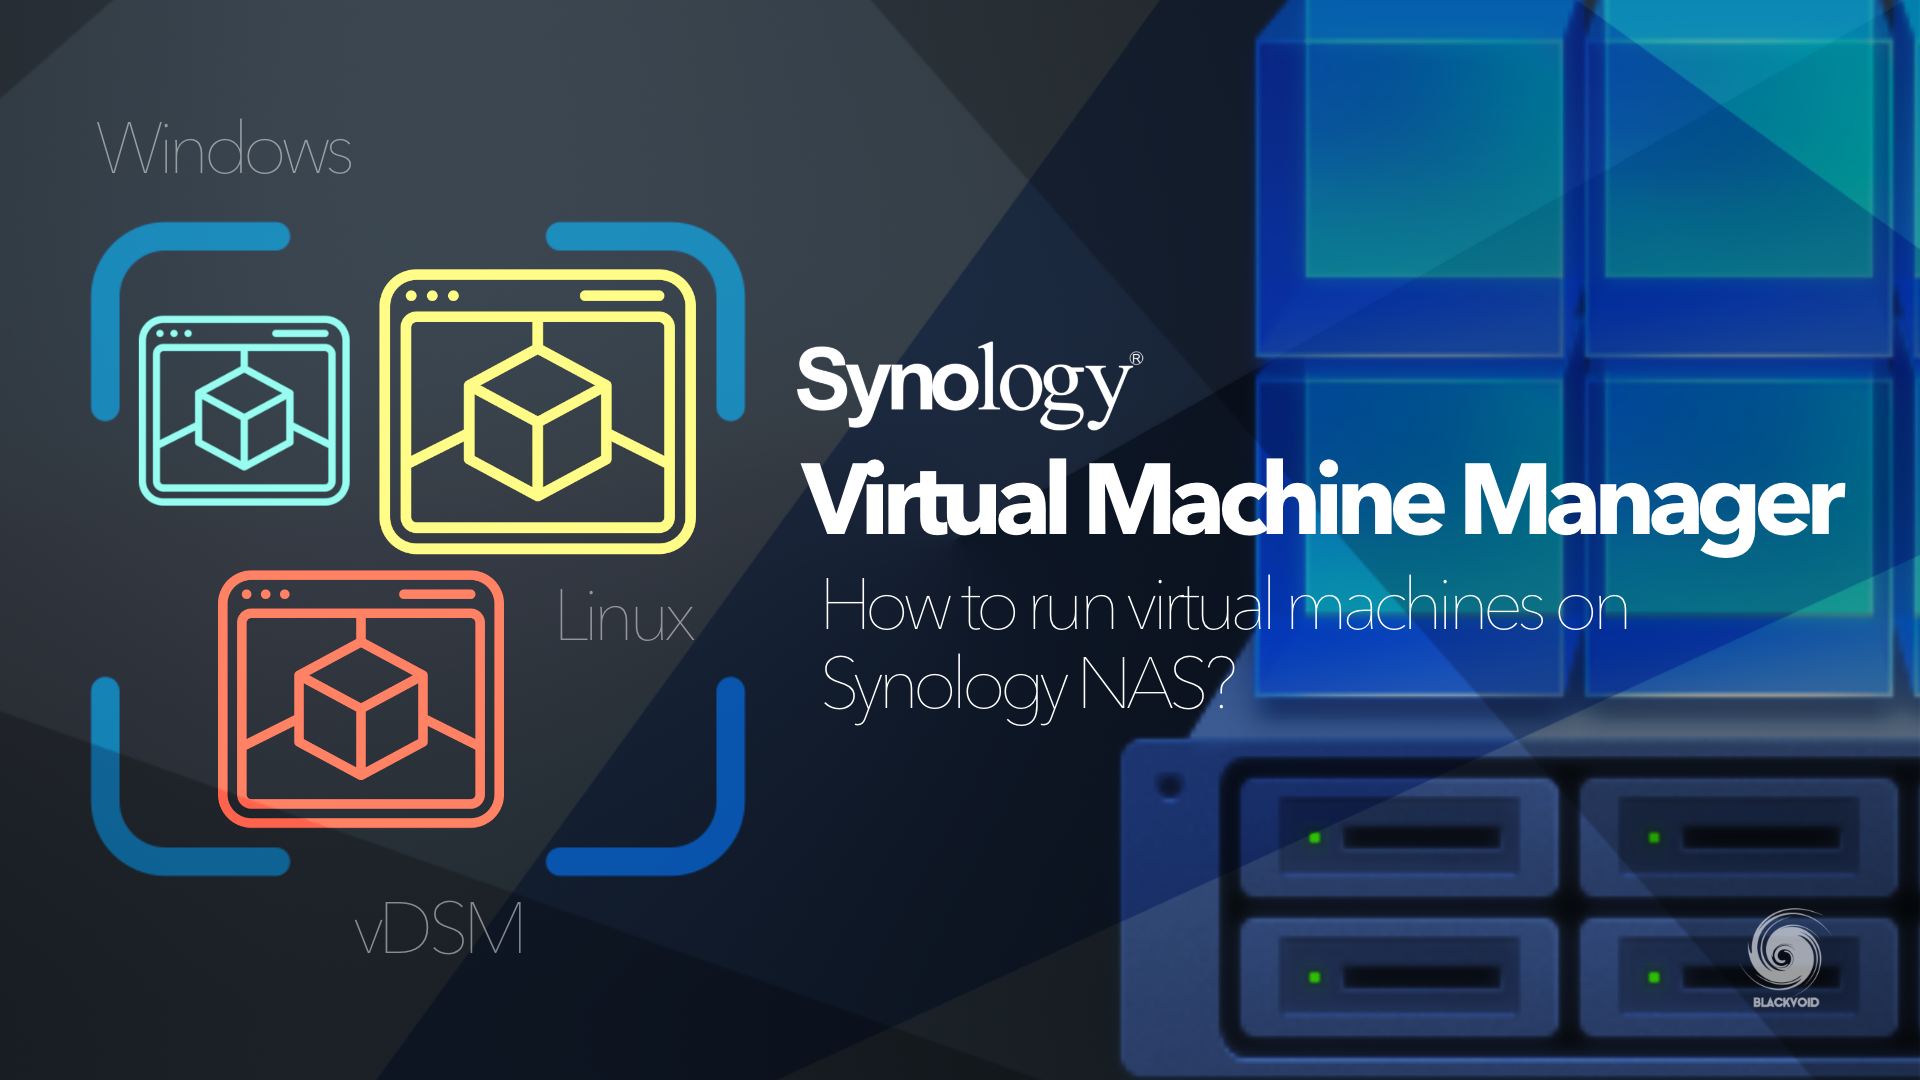 Synology Virtual Machine Manager - how to run virtual machines on Synology NAS?